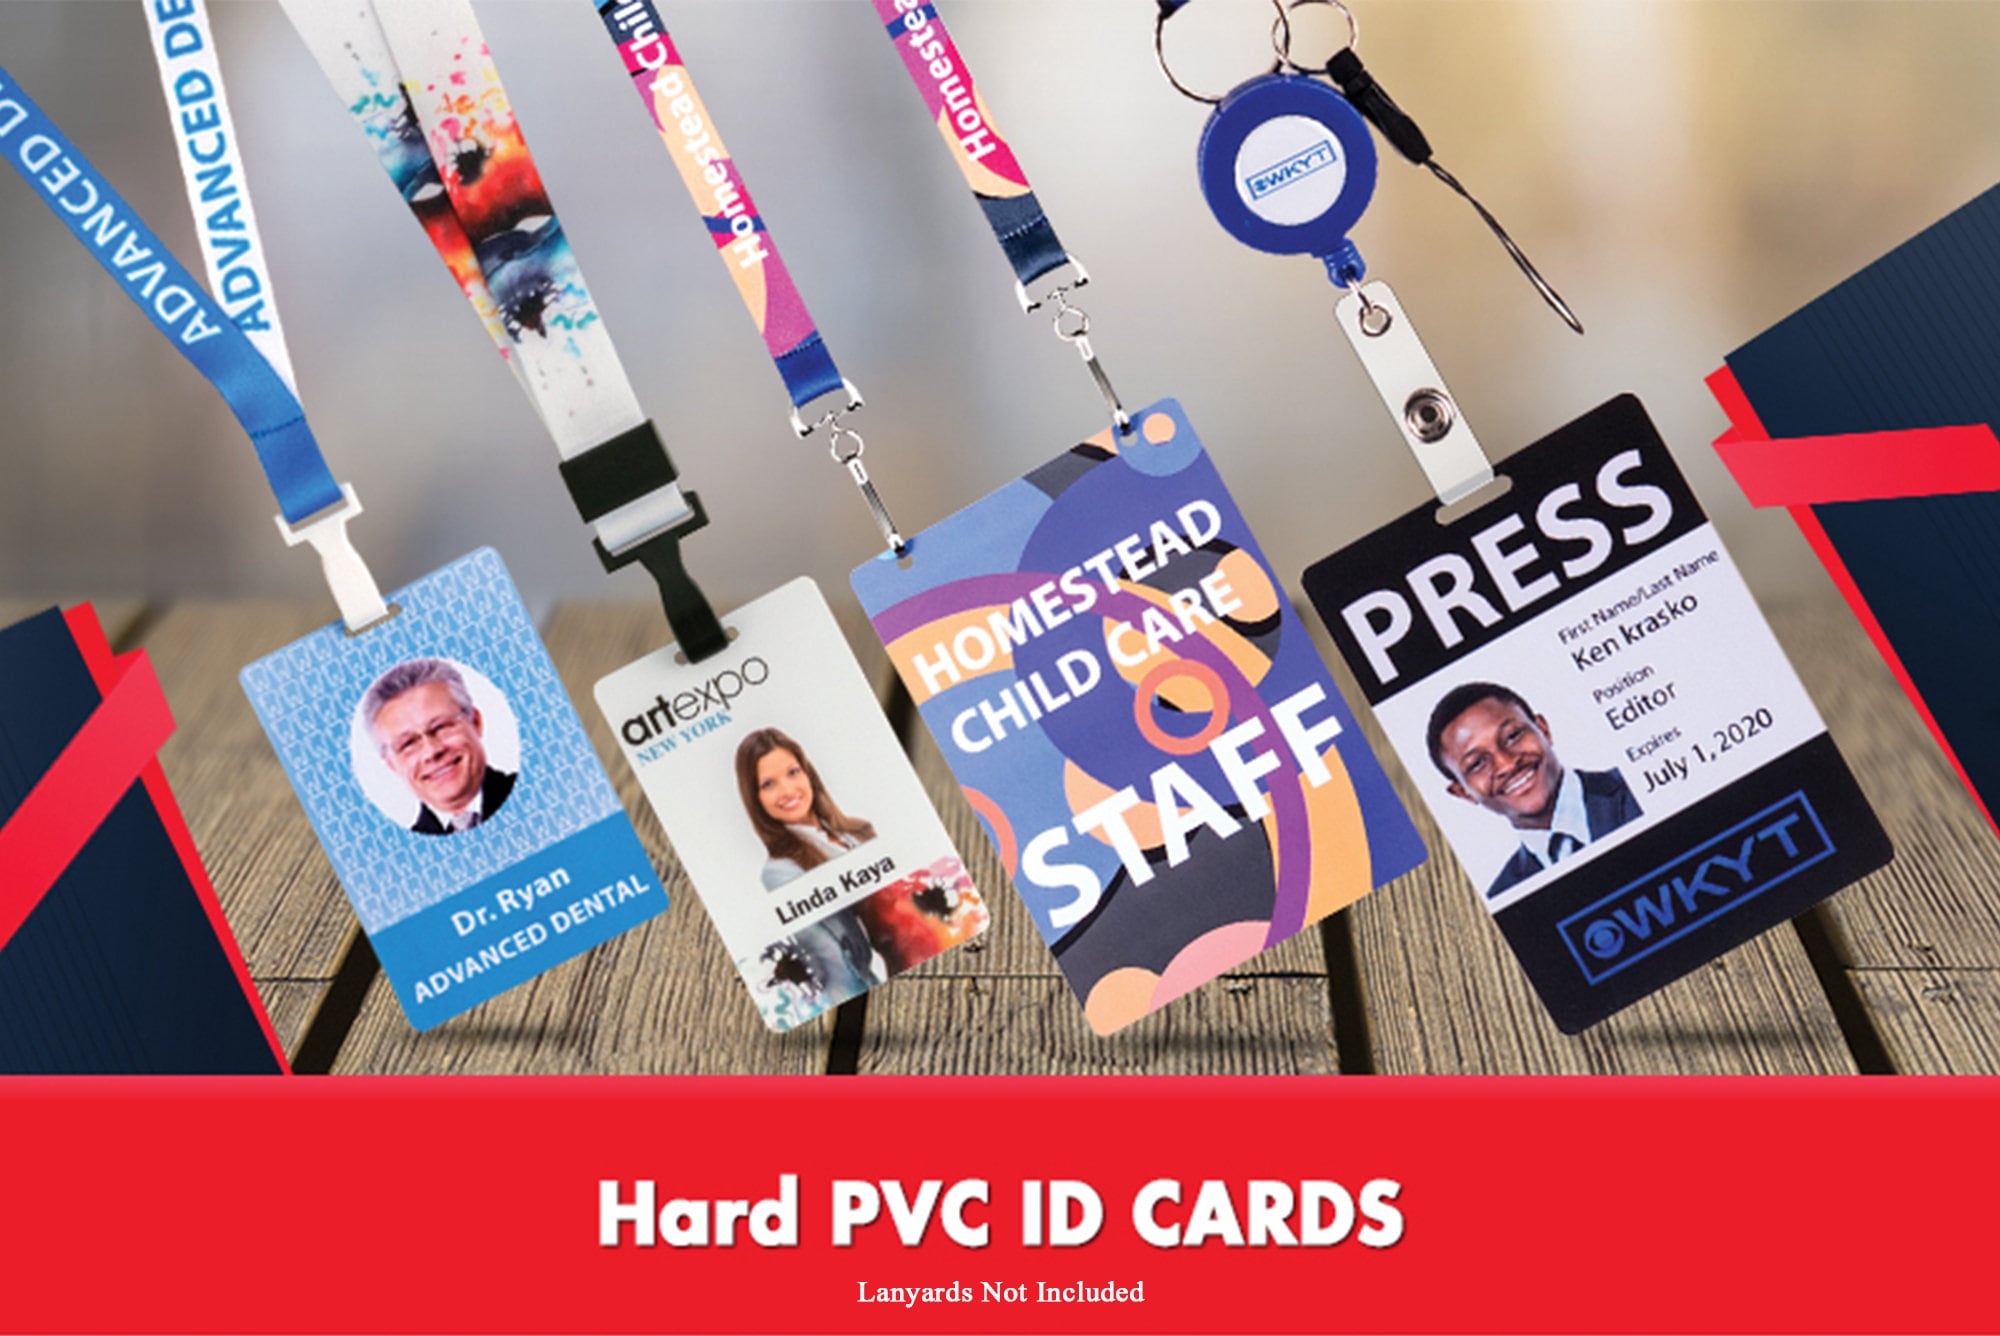 Full Color Plastic Photo ID Badges & PVC Cards Both Side Printed Photo ID  for the Workplace, Visitor Badges, Contractors, Staff Card Bulk 